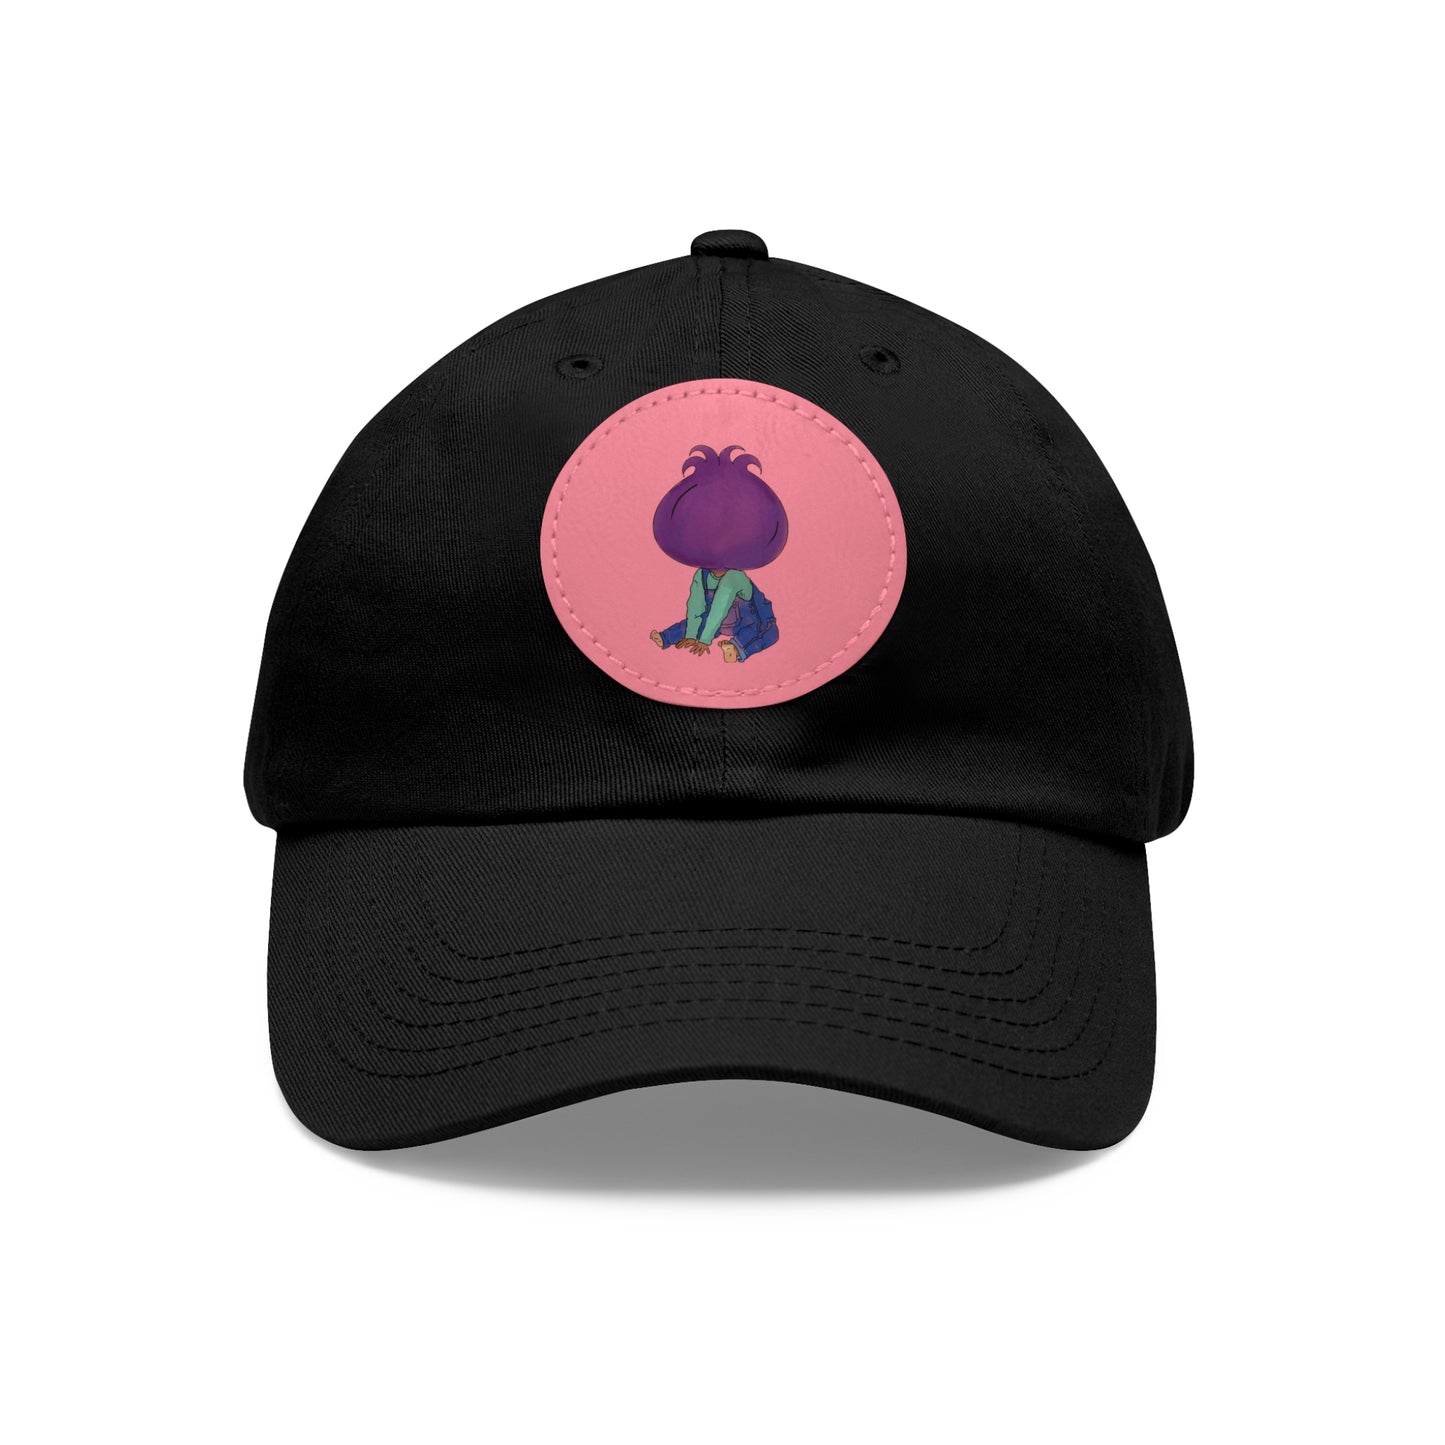 Onion Child Hat with Leather Patch (Round)